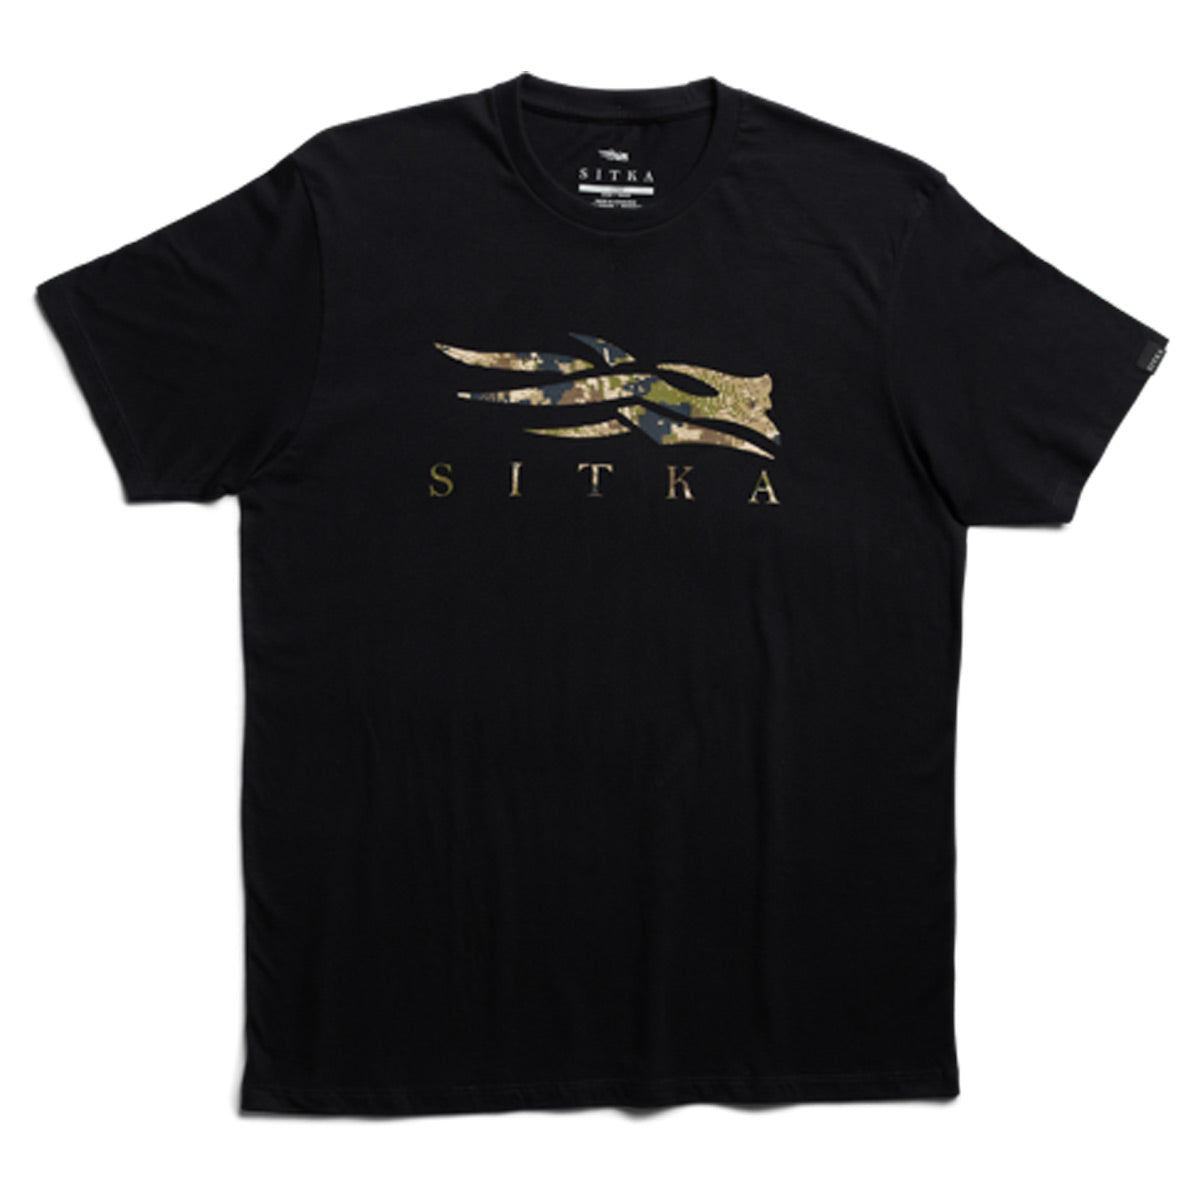 Sitka Optifade Icon Tee in  by GOHUNT | Sitka - GOHUNT Shop